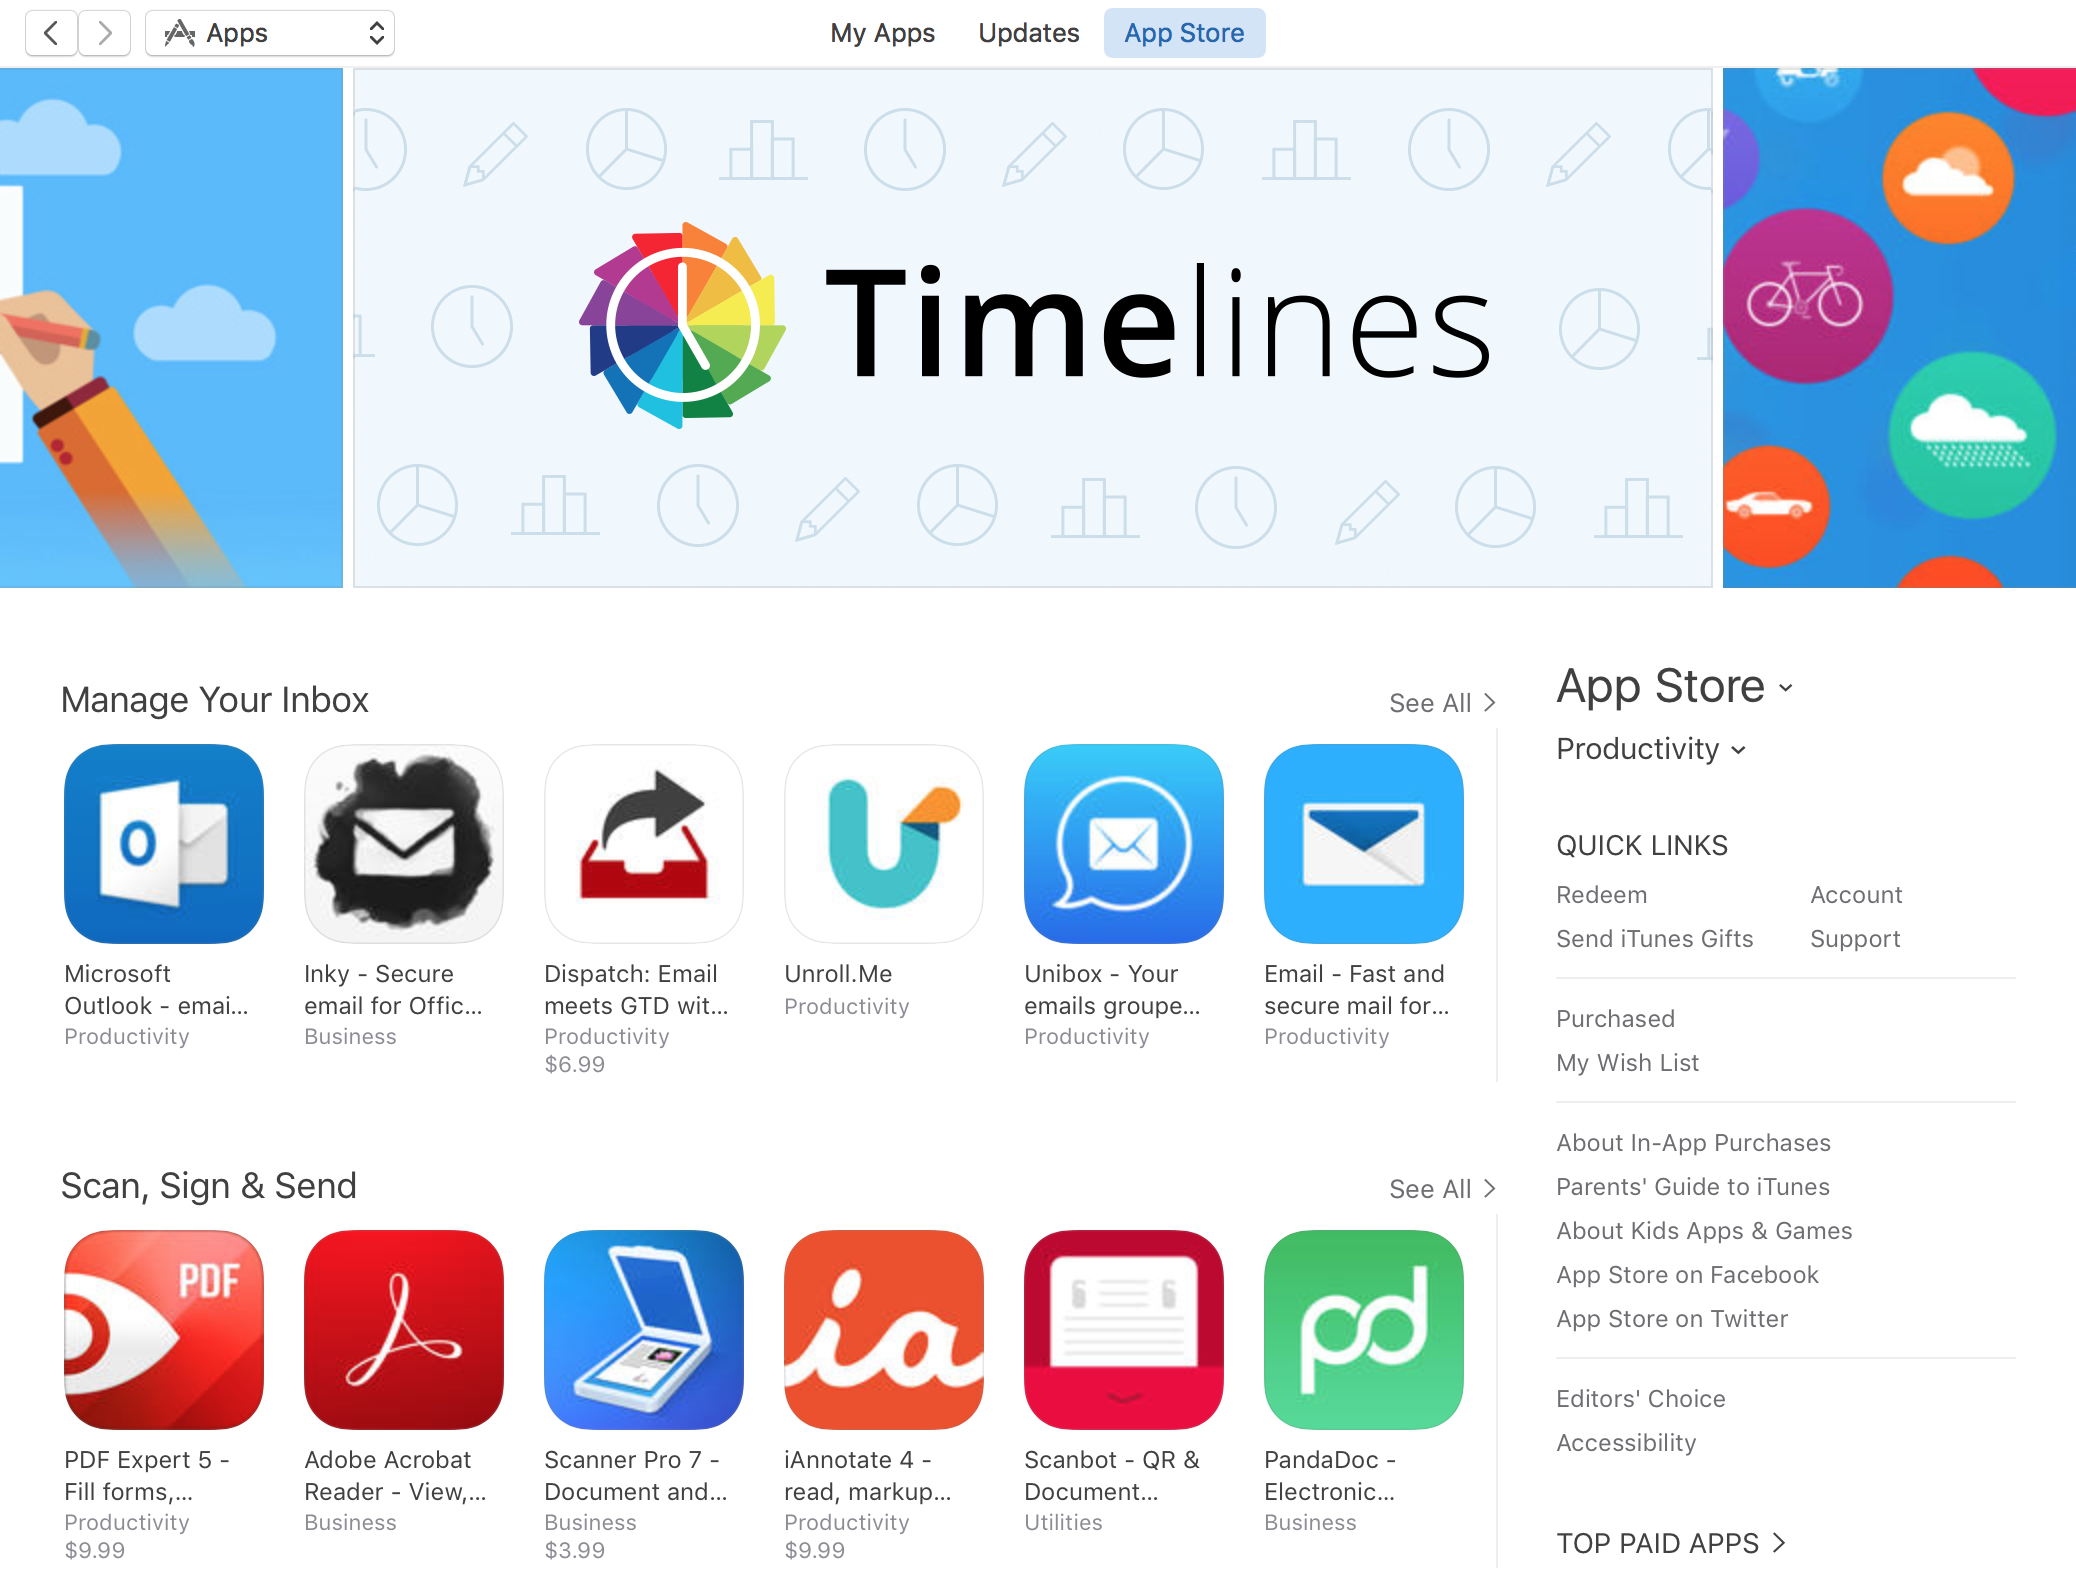 Timelines featured on the App Store, Productivity category